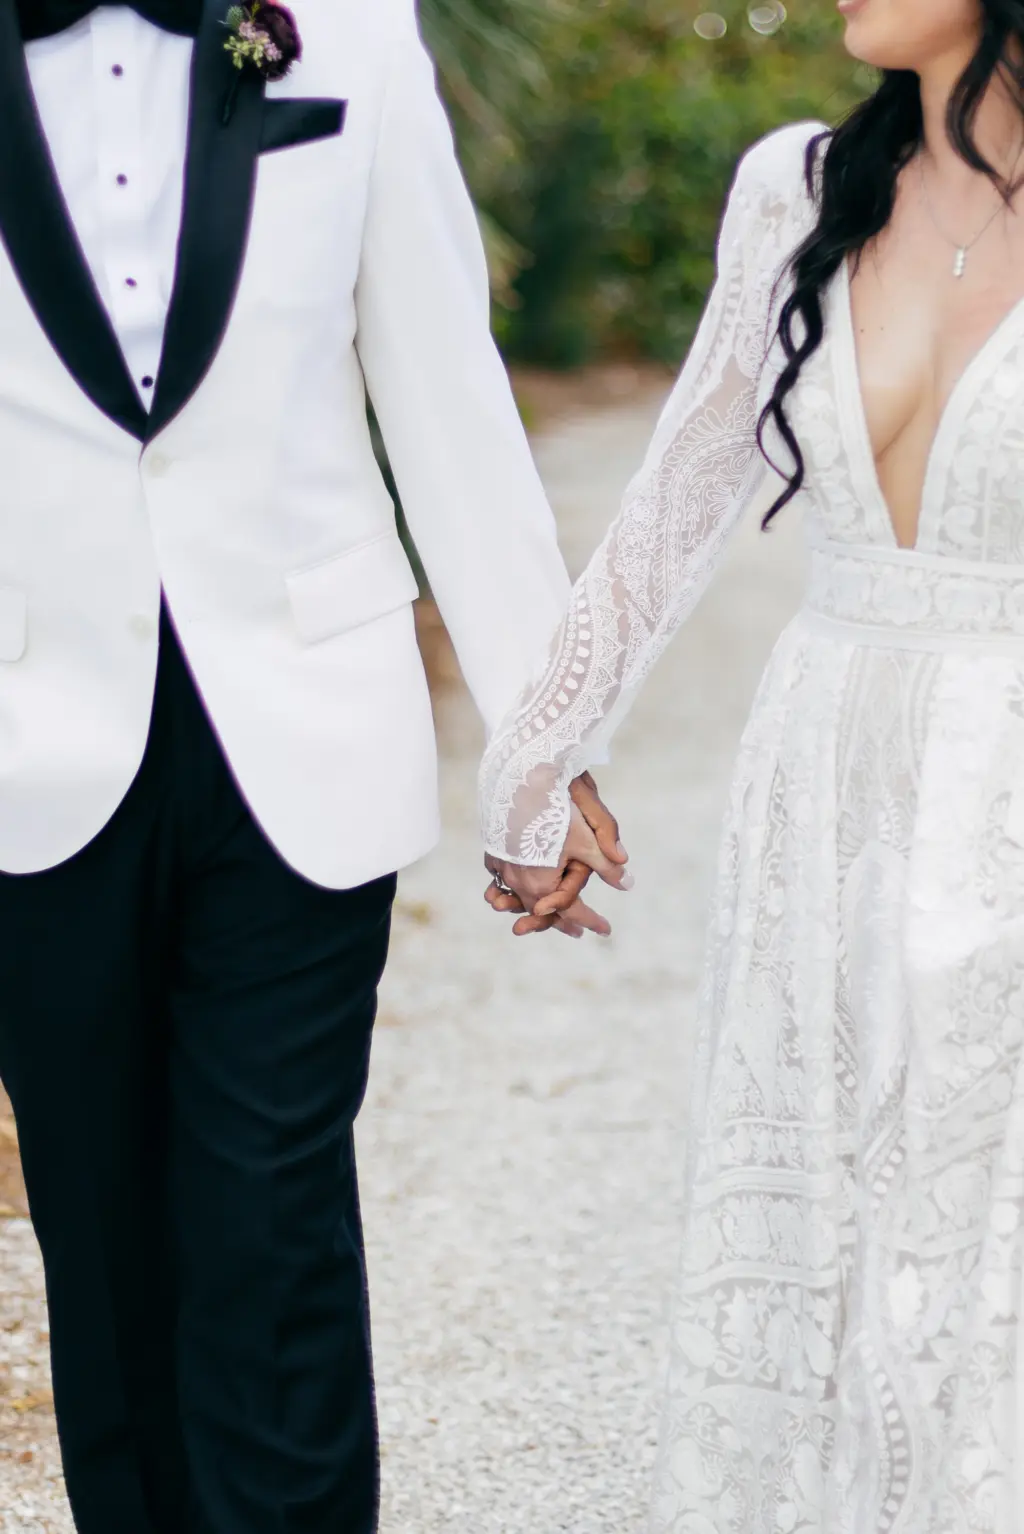 Black and White Tuxedo Inspiration | White and Nude Boho Lace Rue de Seine Wedding Dress with Removable Sleeves Ideas